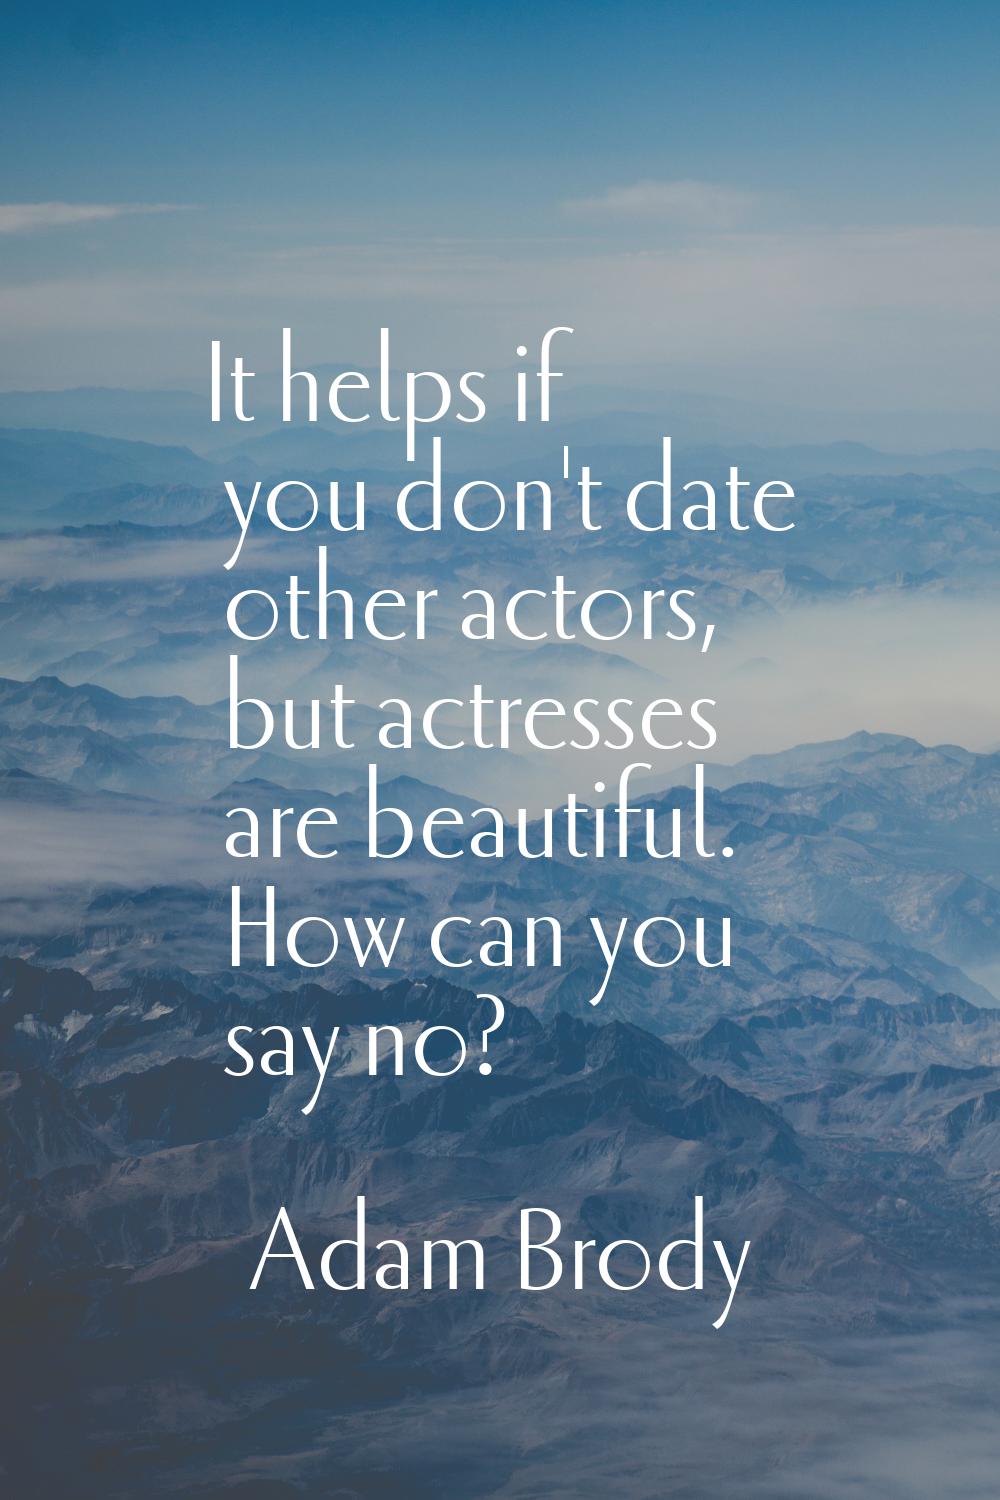 It helps if you don't date other actors, but actresses are beautiful. How can you say no?